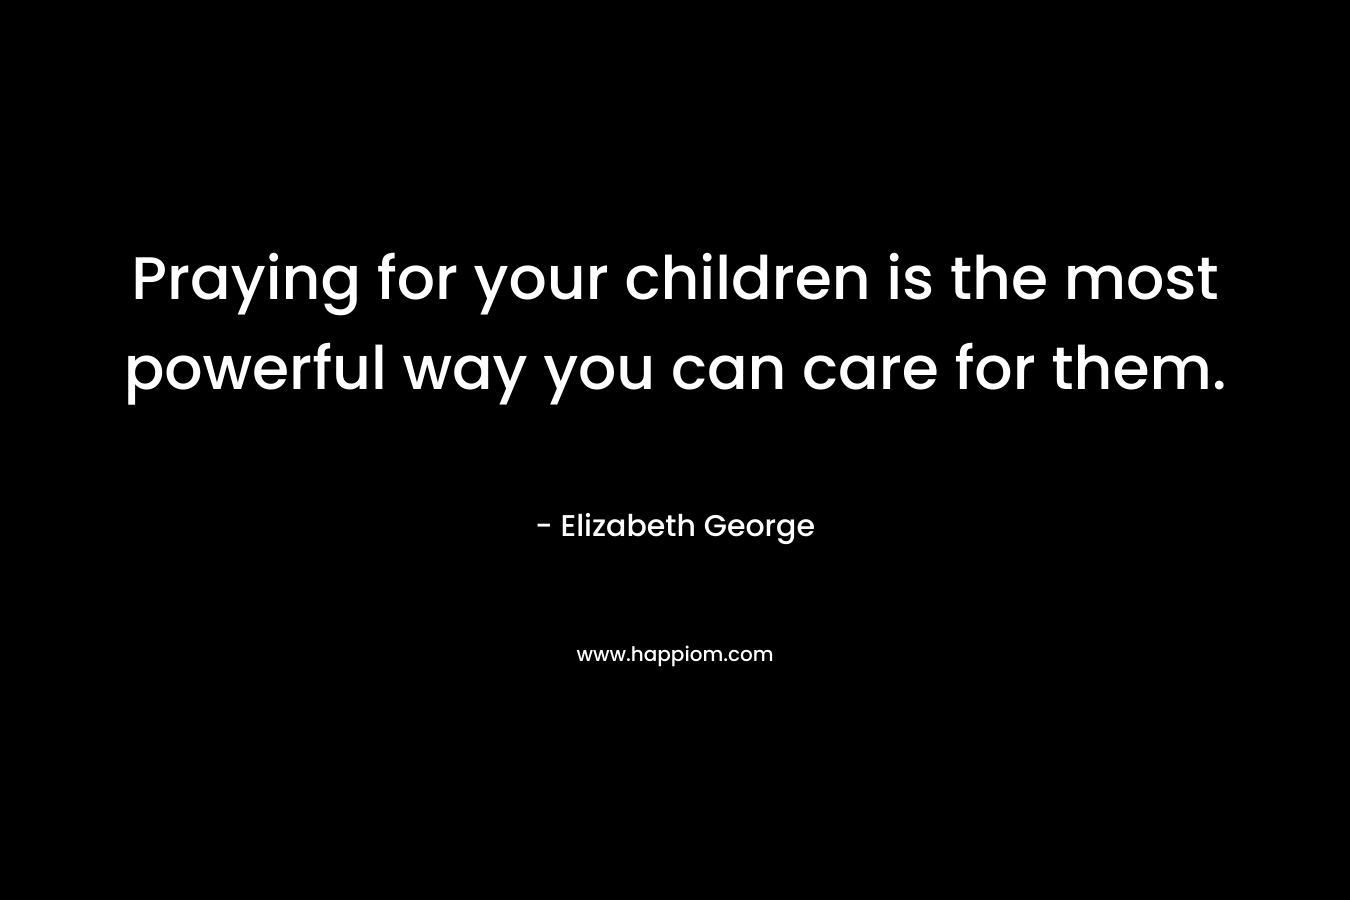 Praying for your children is the most powerful way you can care for them.